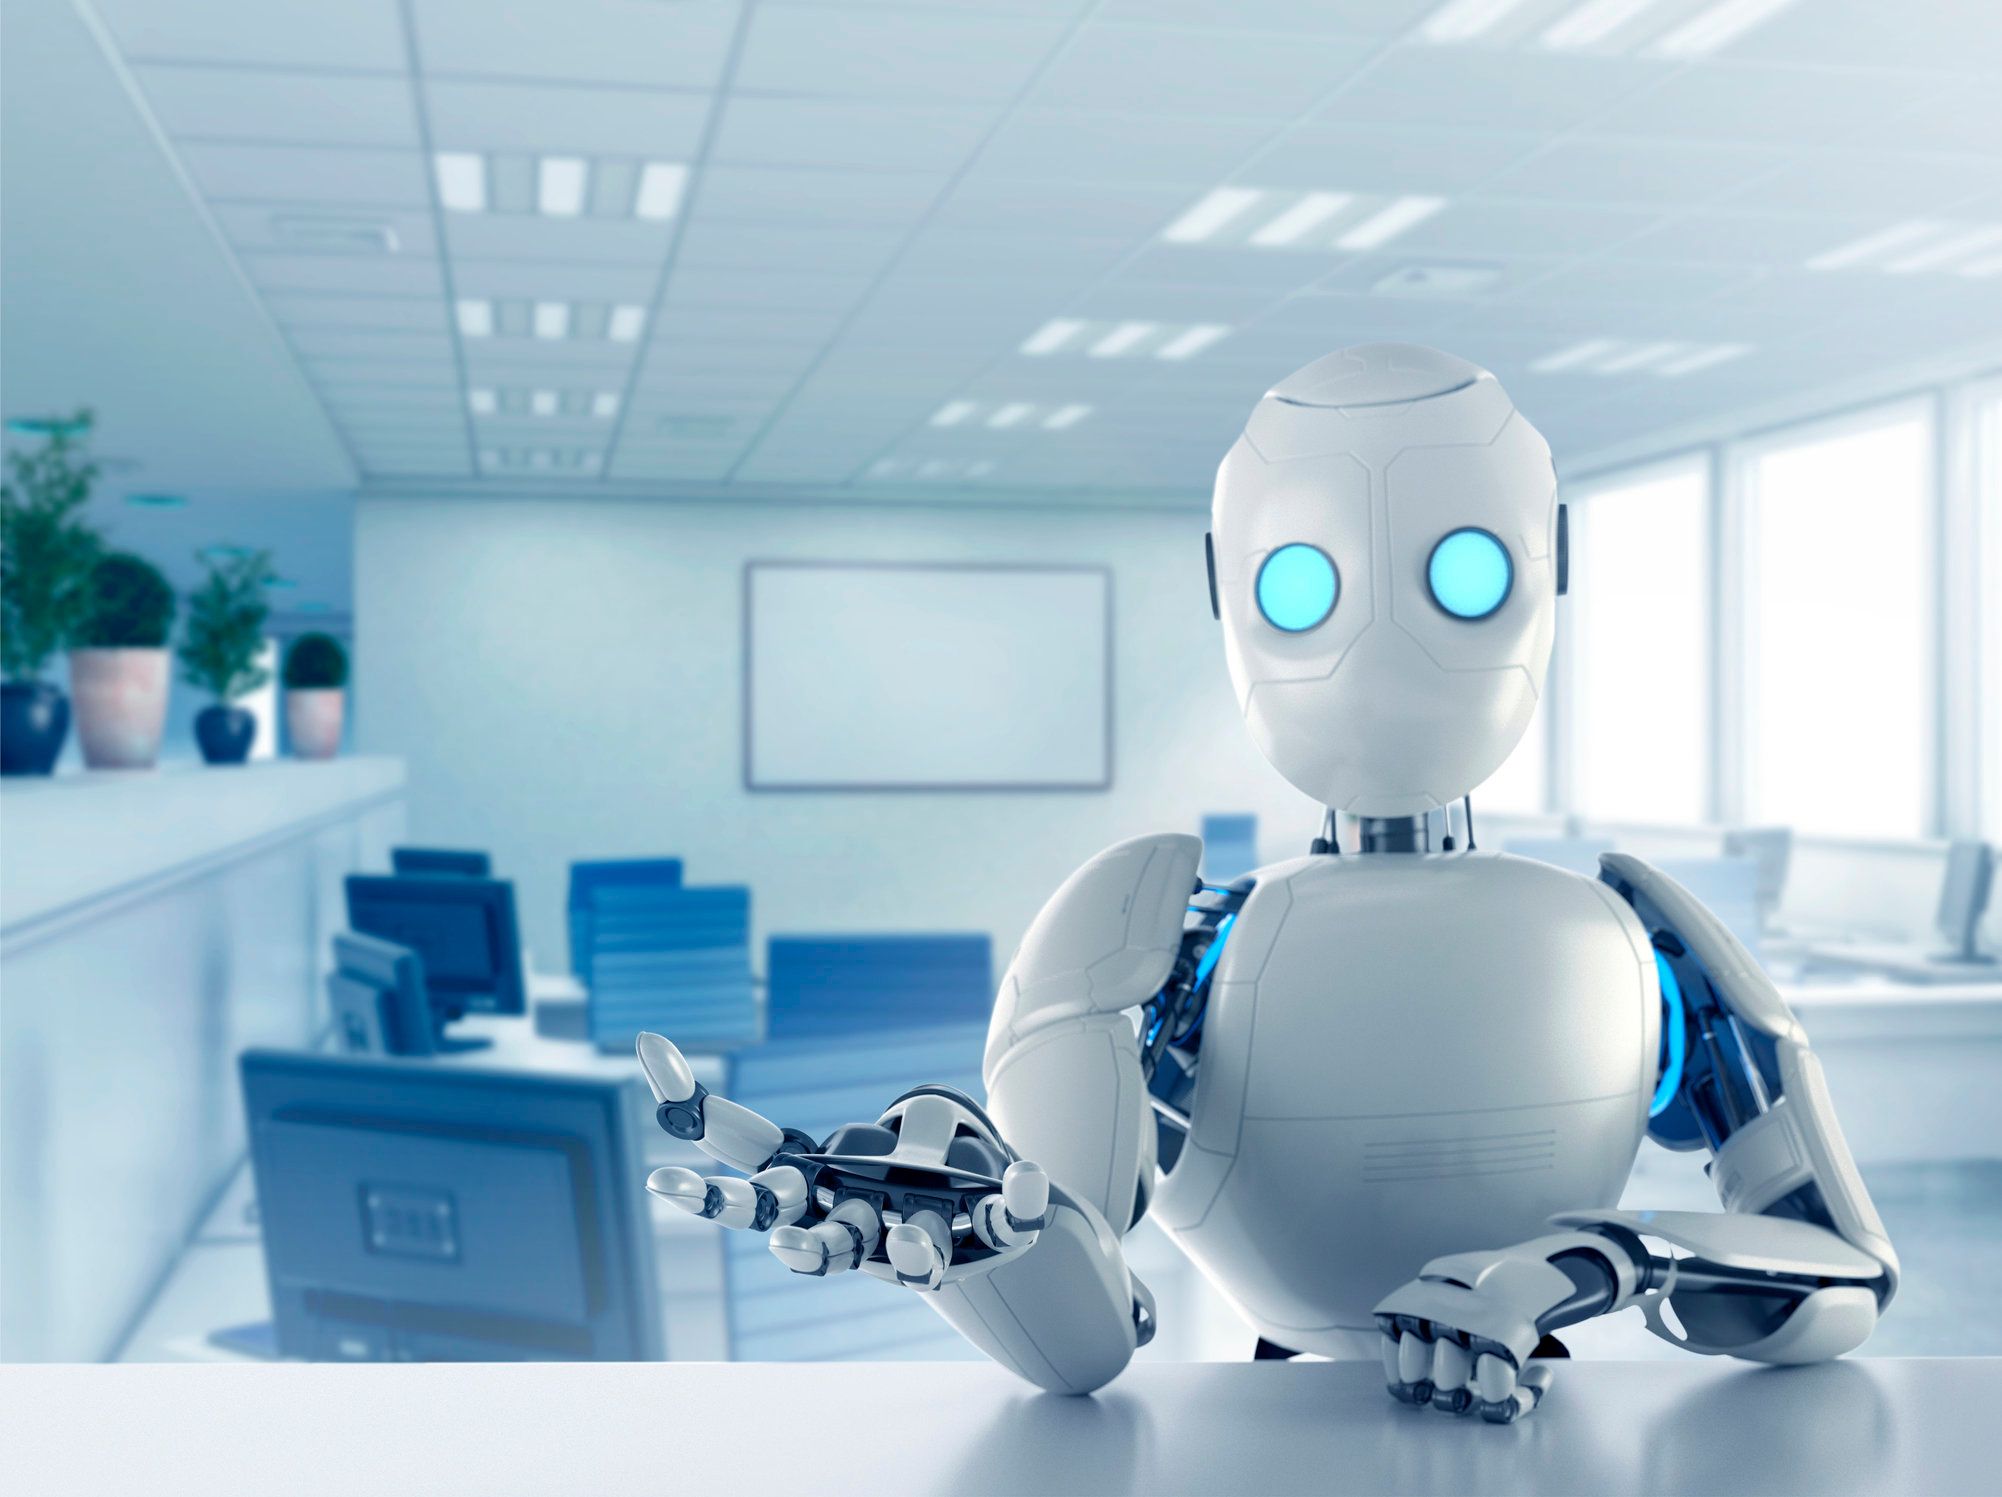 Image of a humanoid robot sat at a desk